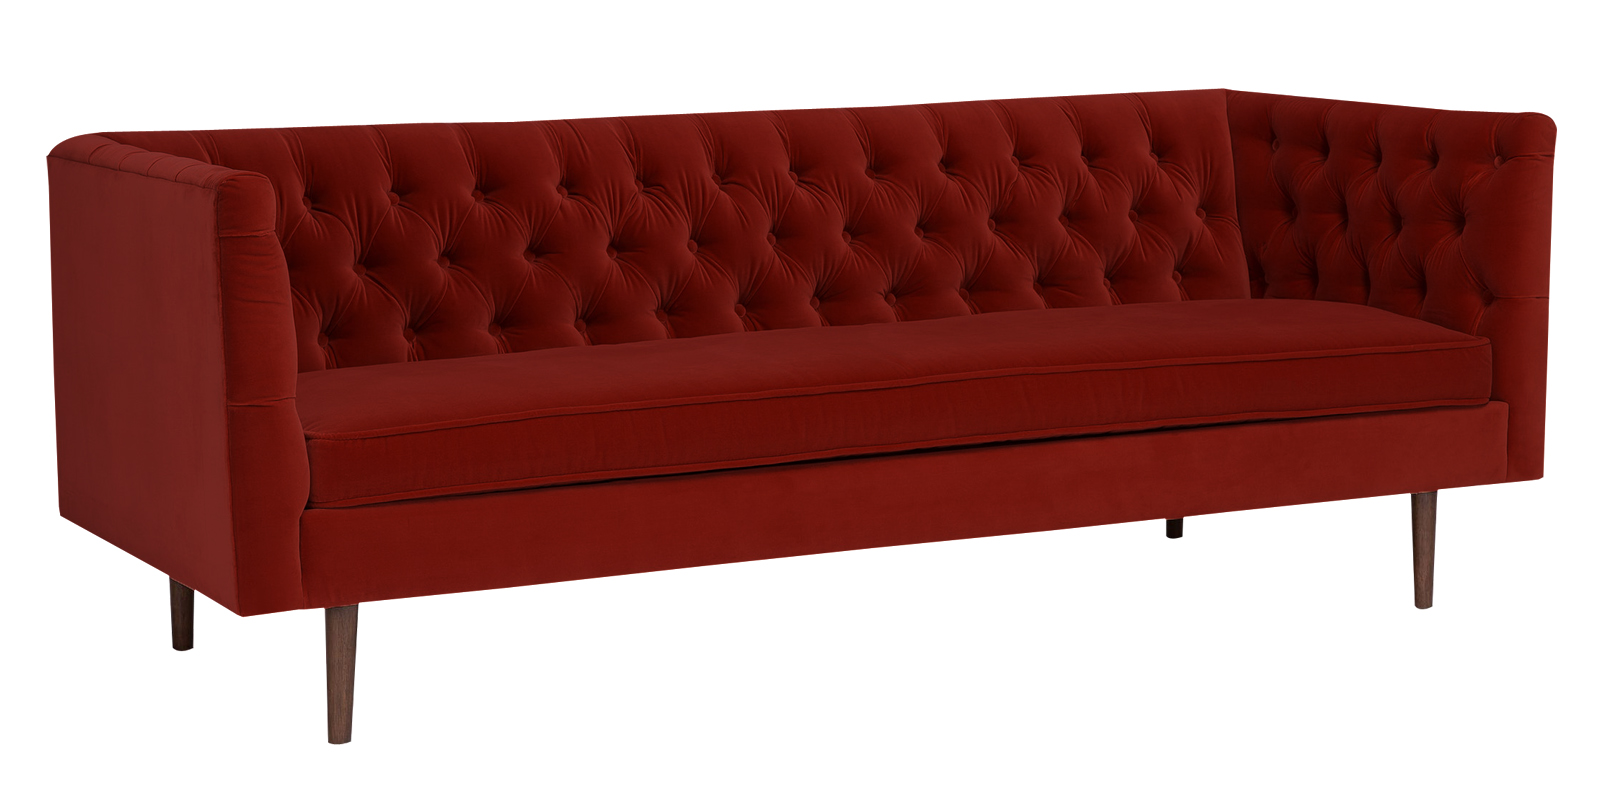 Chesterfield Red Velvet Tufted Three Seater Sofa. | Dreamzz Furniture